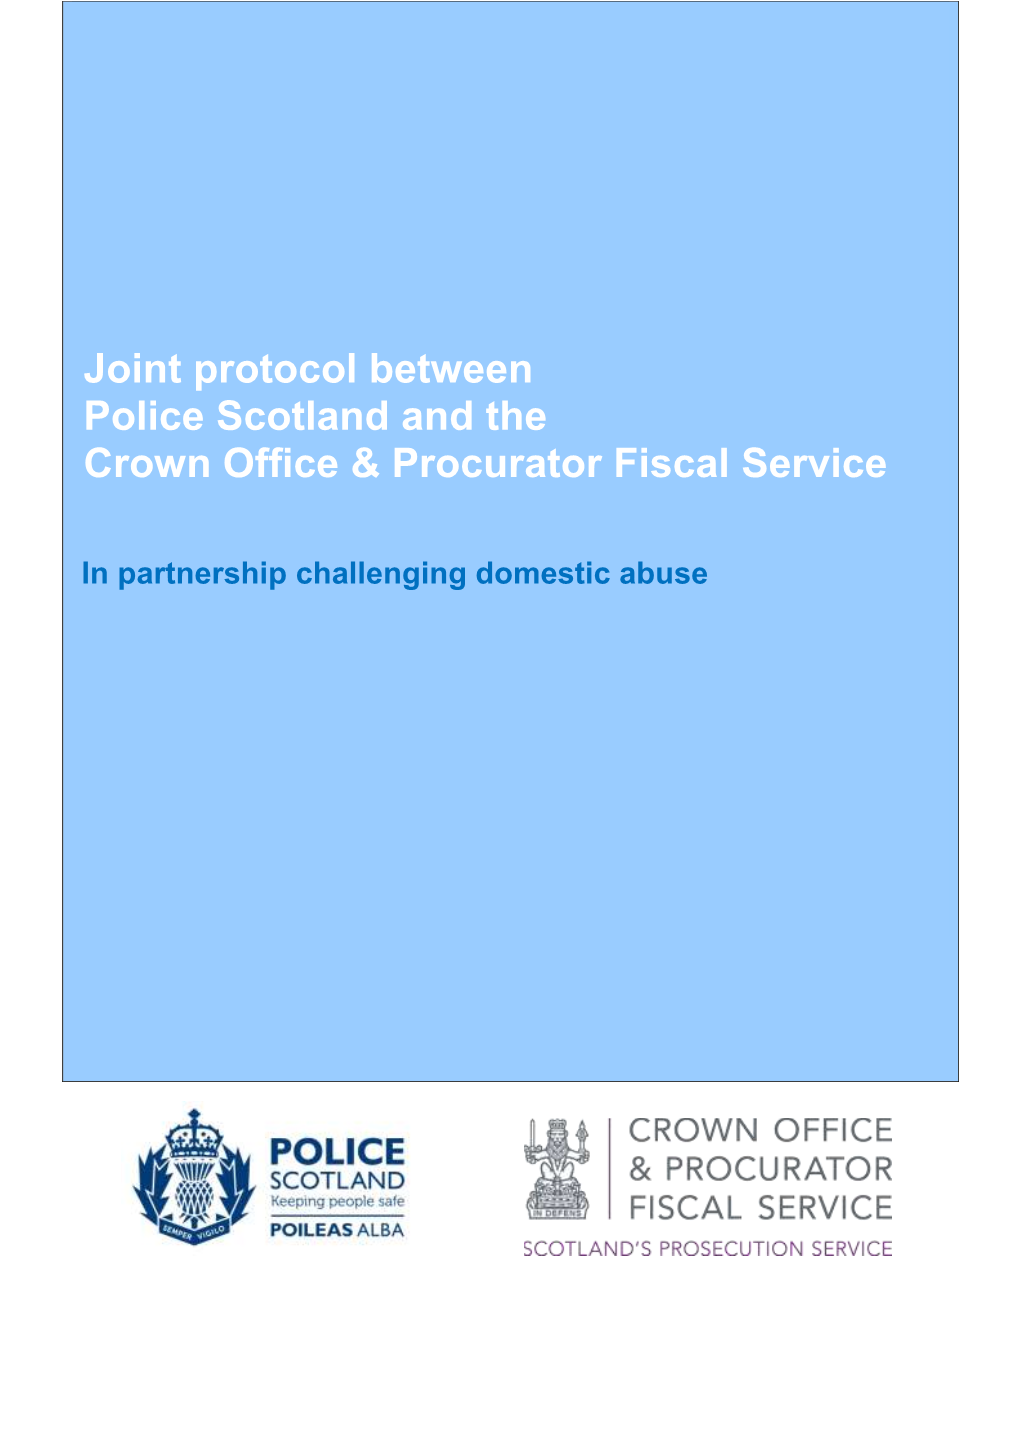 Joint Protocol Between Police Scotland and the Crown Office & Procurator Fiscal Service